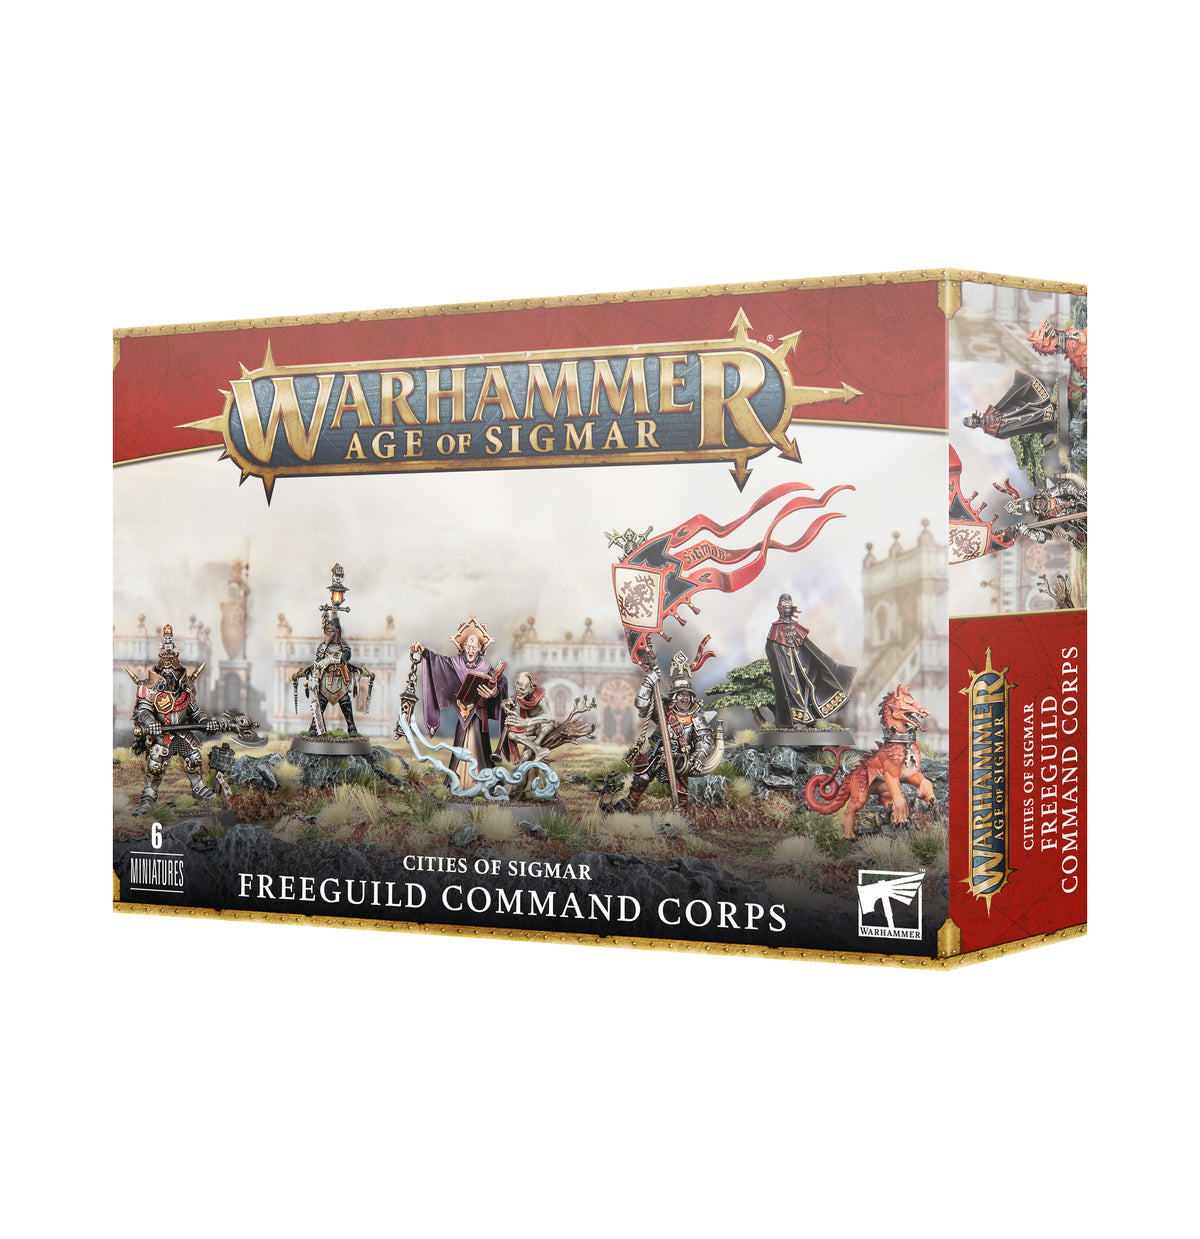 Warhammer Age Of Sigmar: CITIES OF SIGMAR FREEGUILD COMMAND CORPS